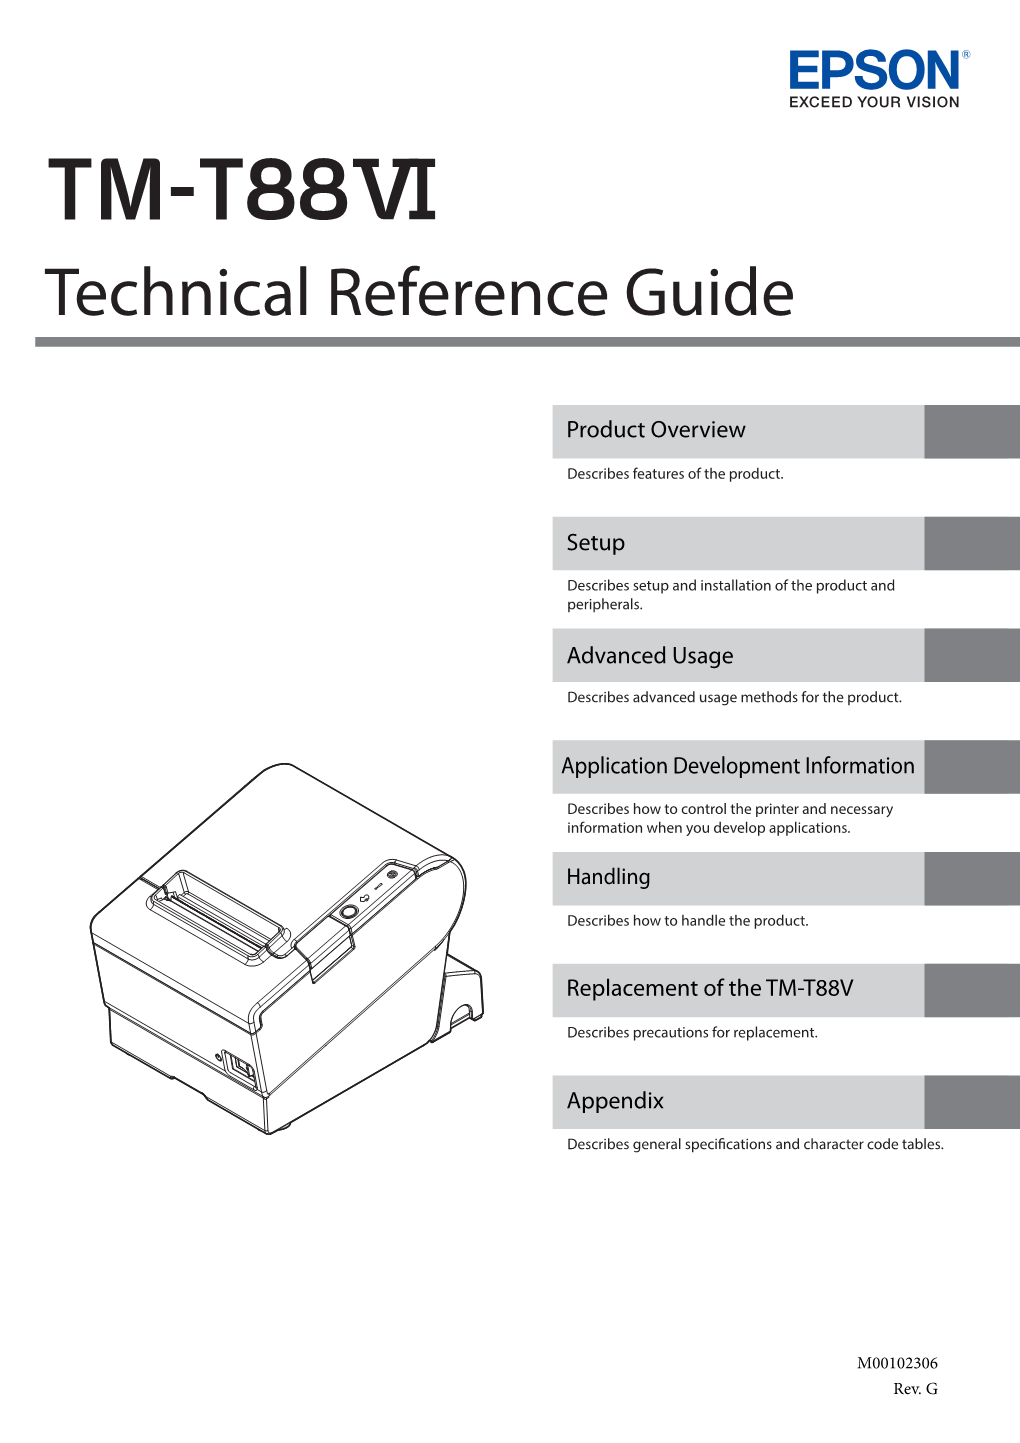 TM-T88VI Technical Reference Guide